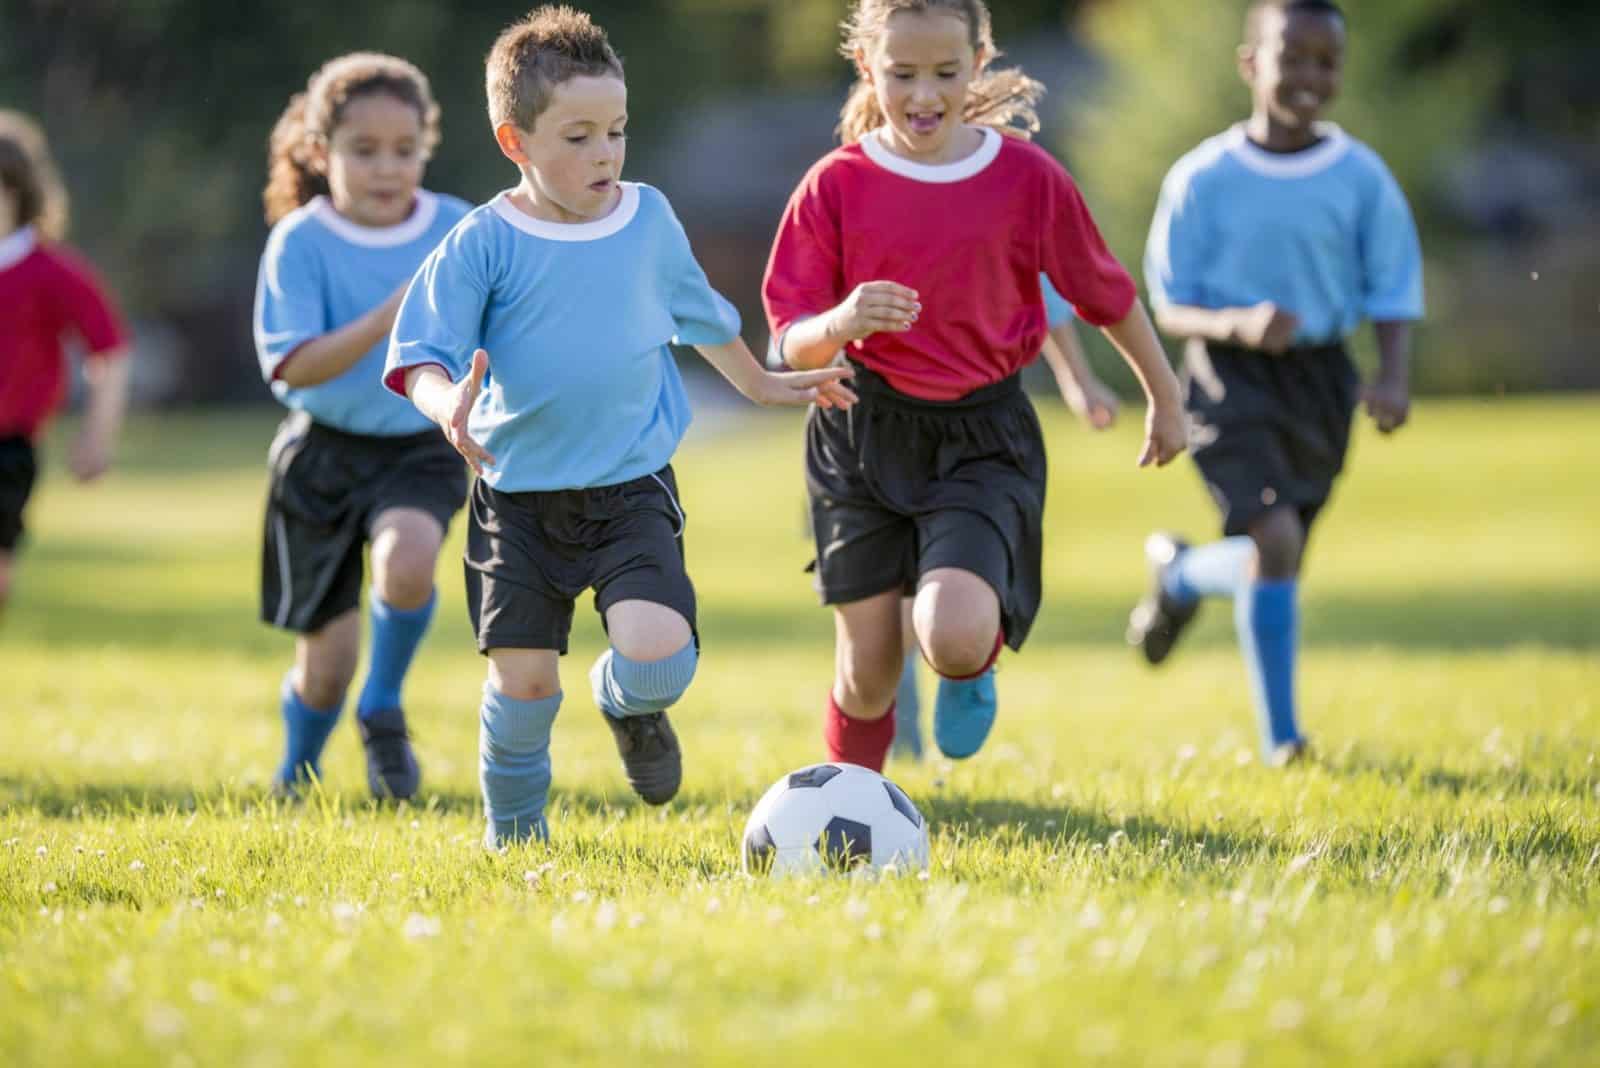 Reasons Children Should Play Sports